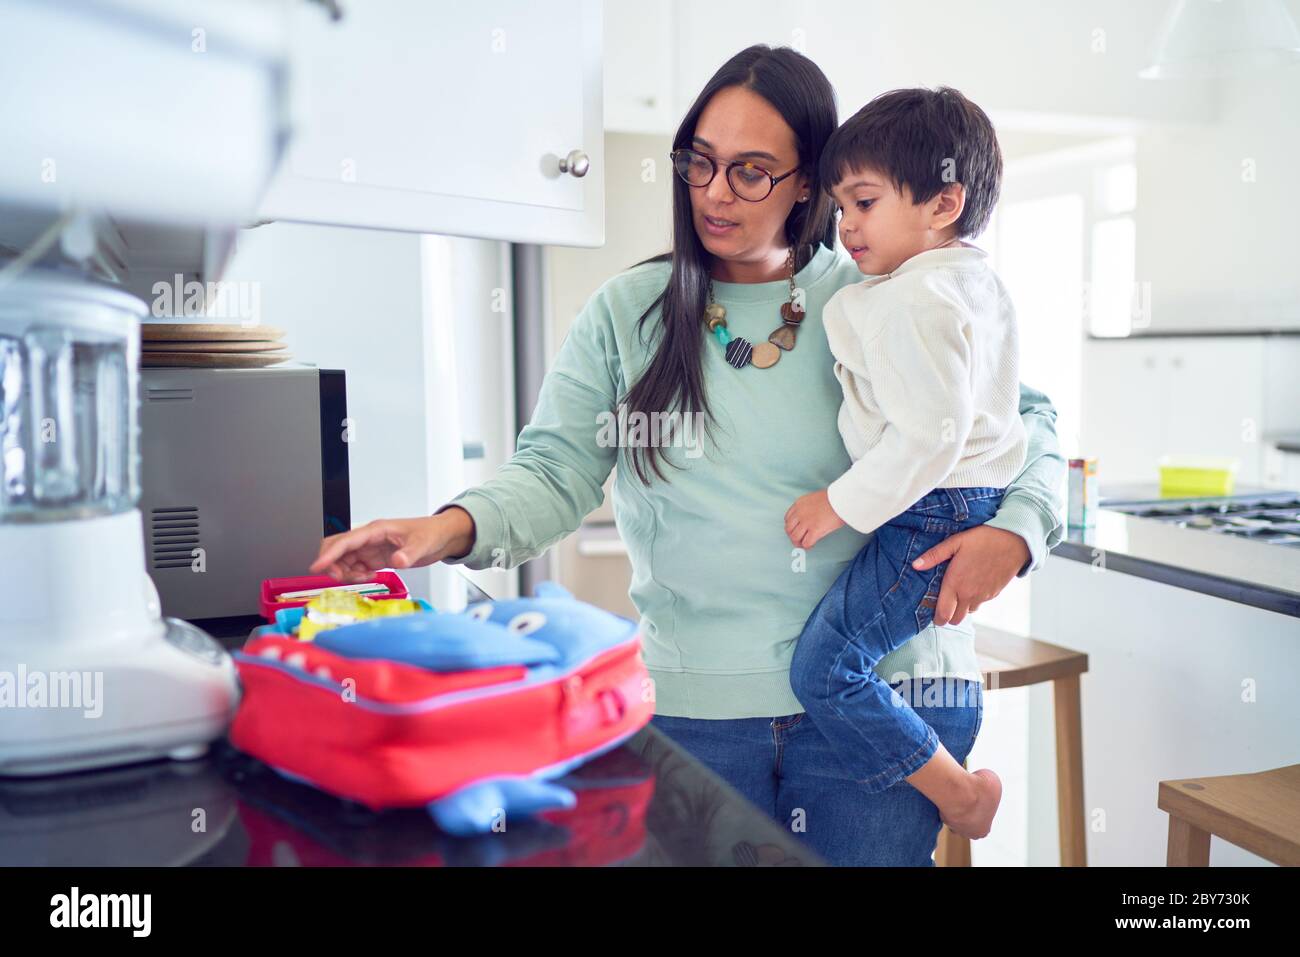 Mother holding son and preparing school lunch in kitchen Stock Photo